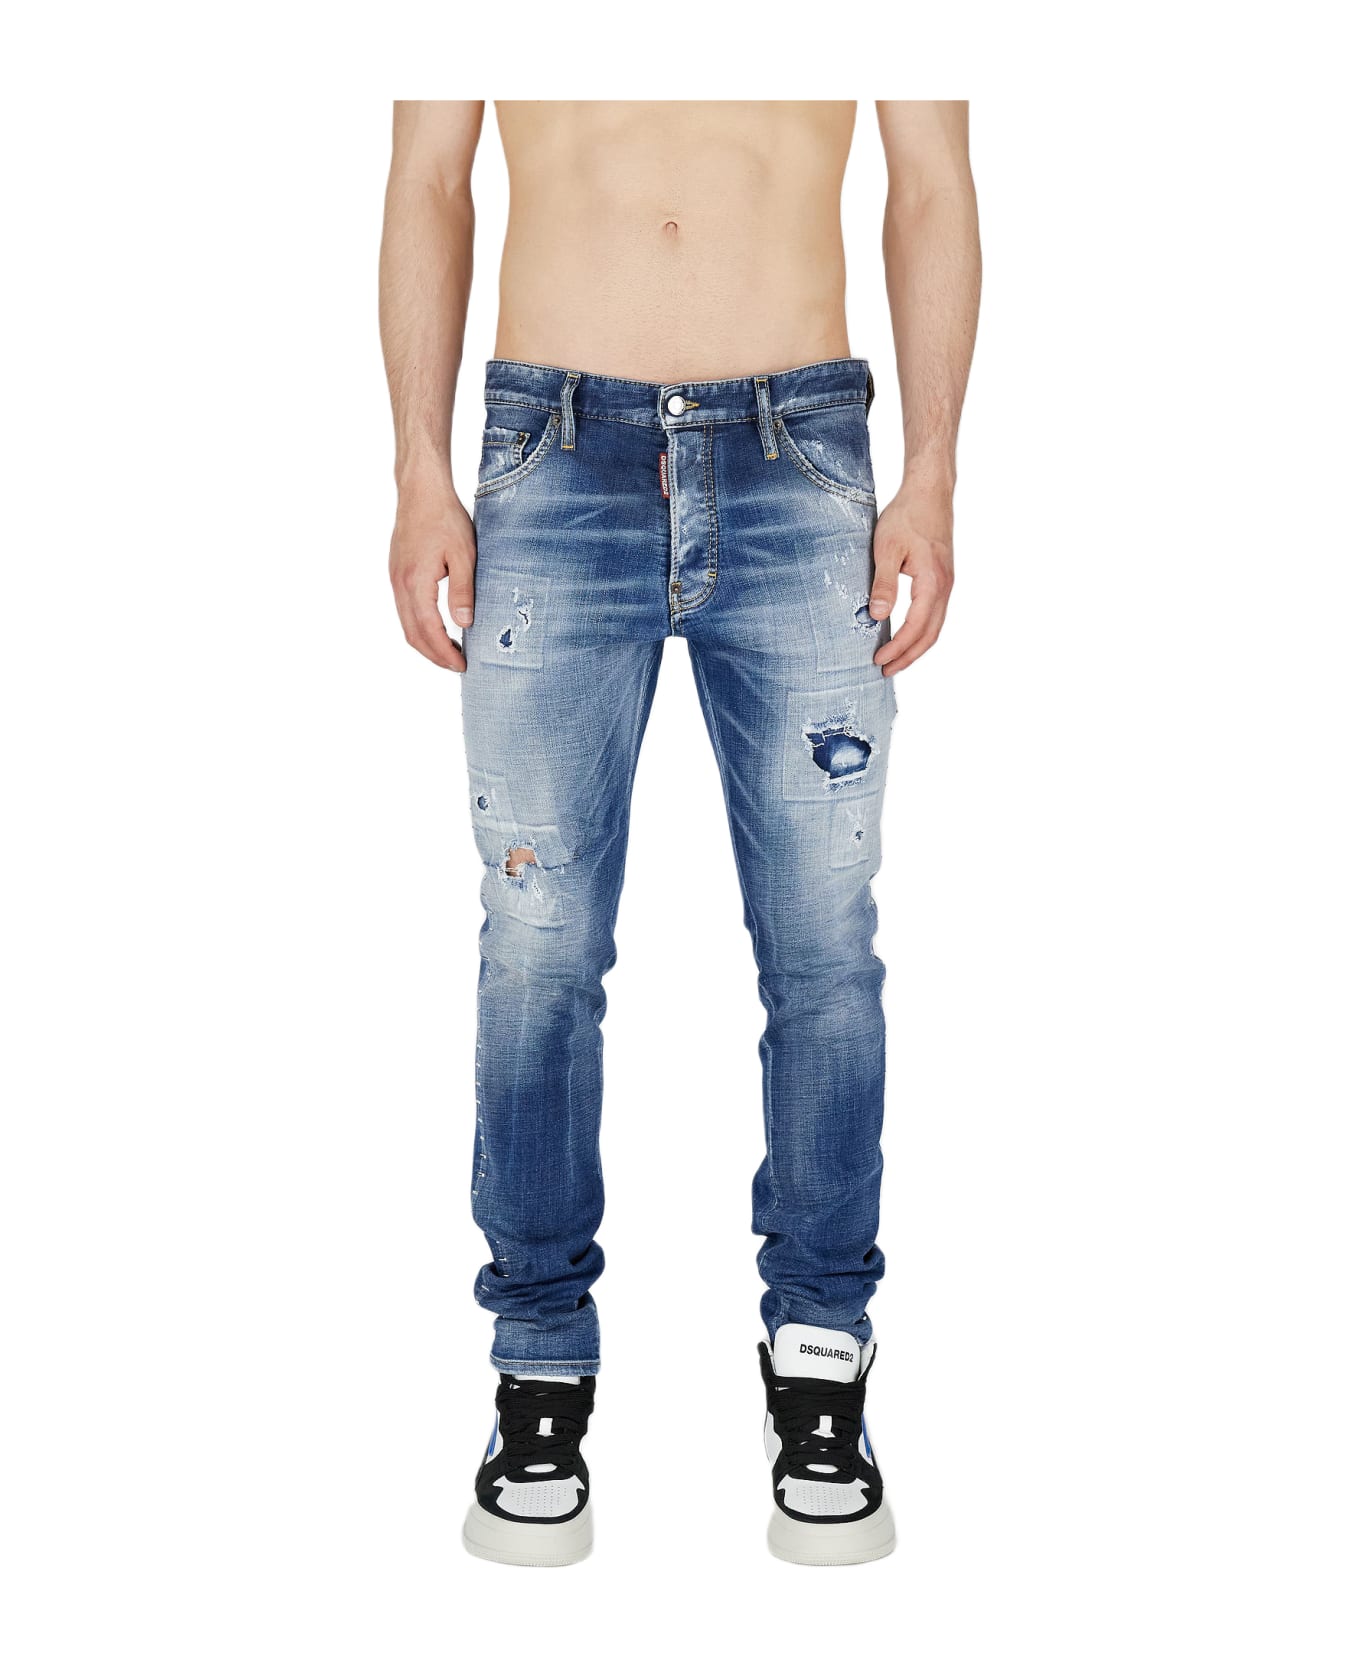 Dsquared2 Jeans - Blue navy ボトムス